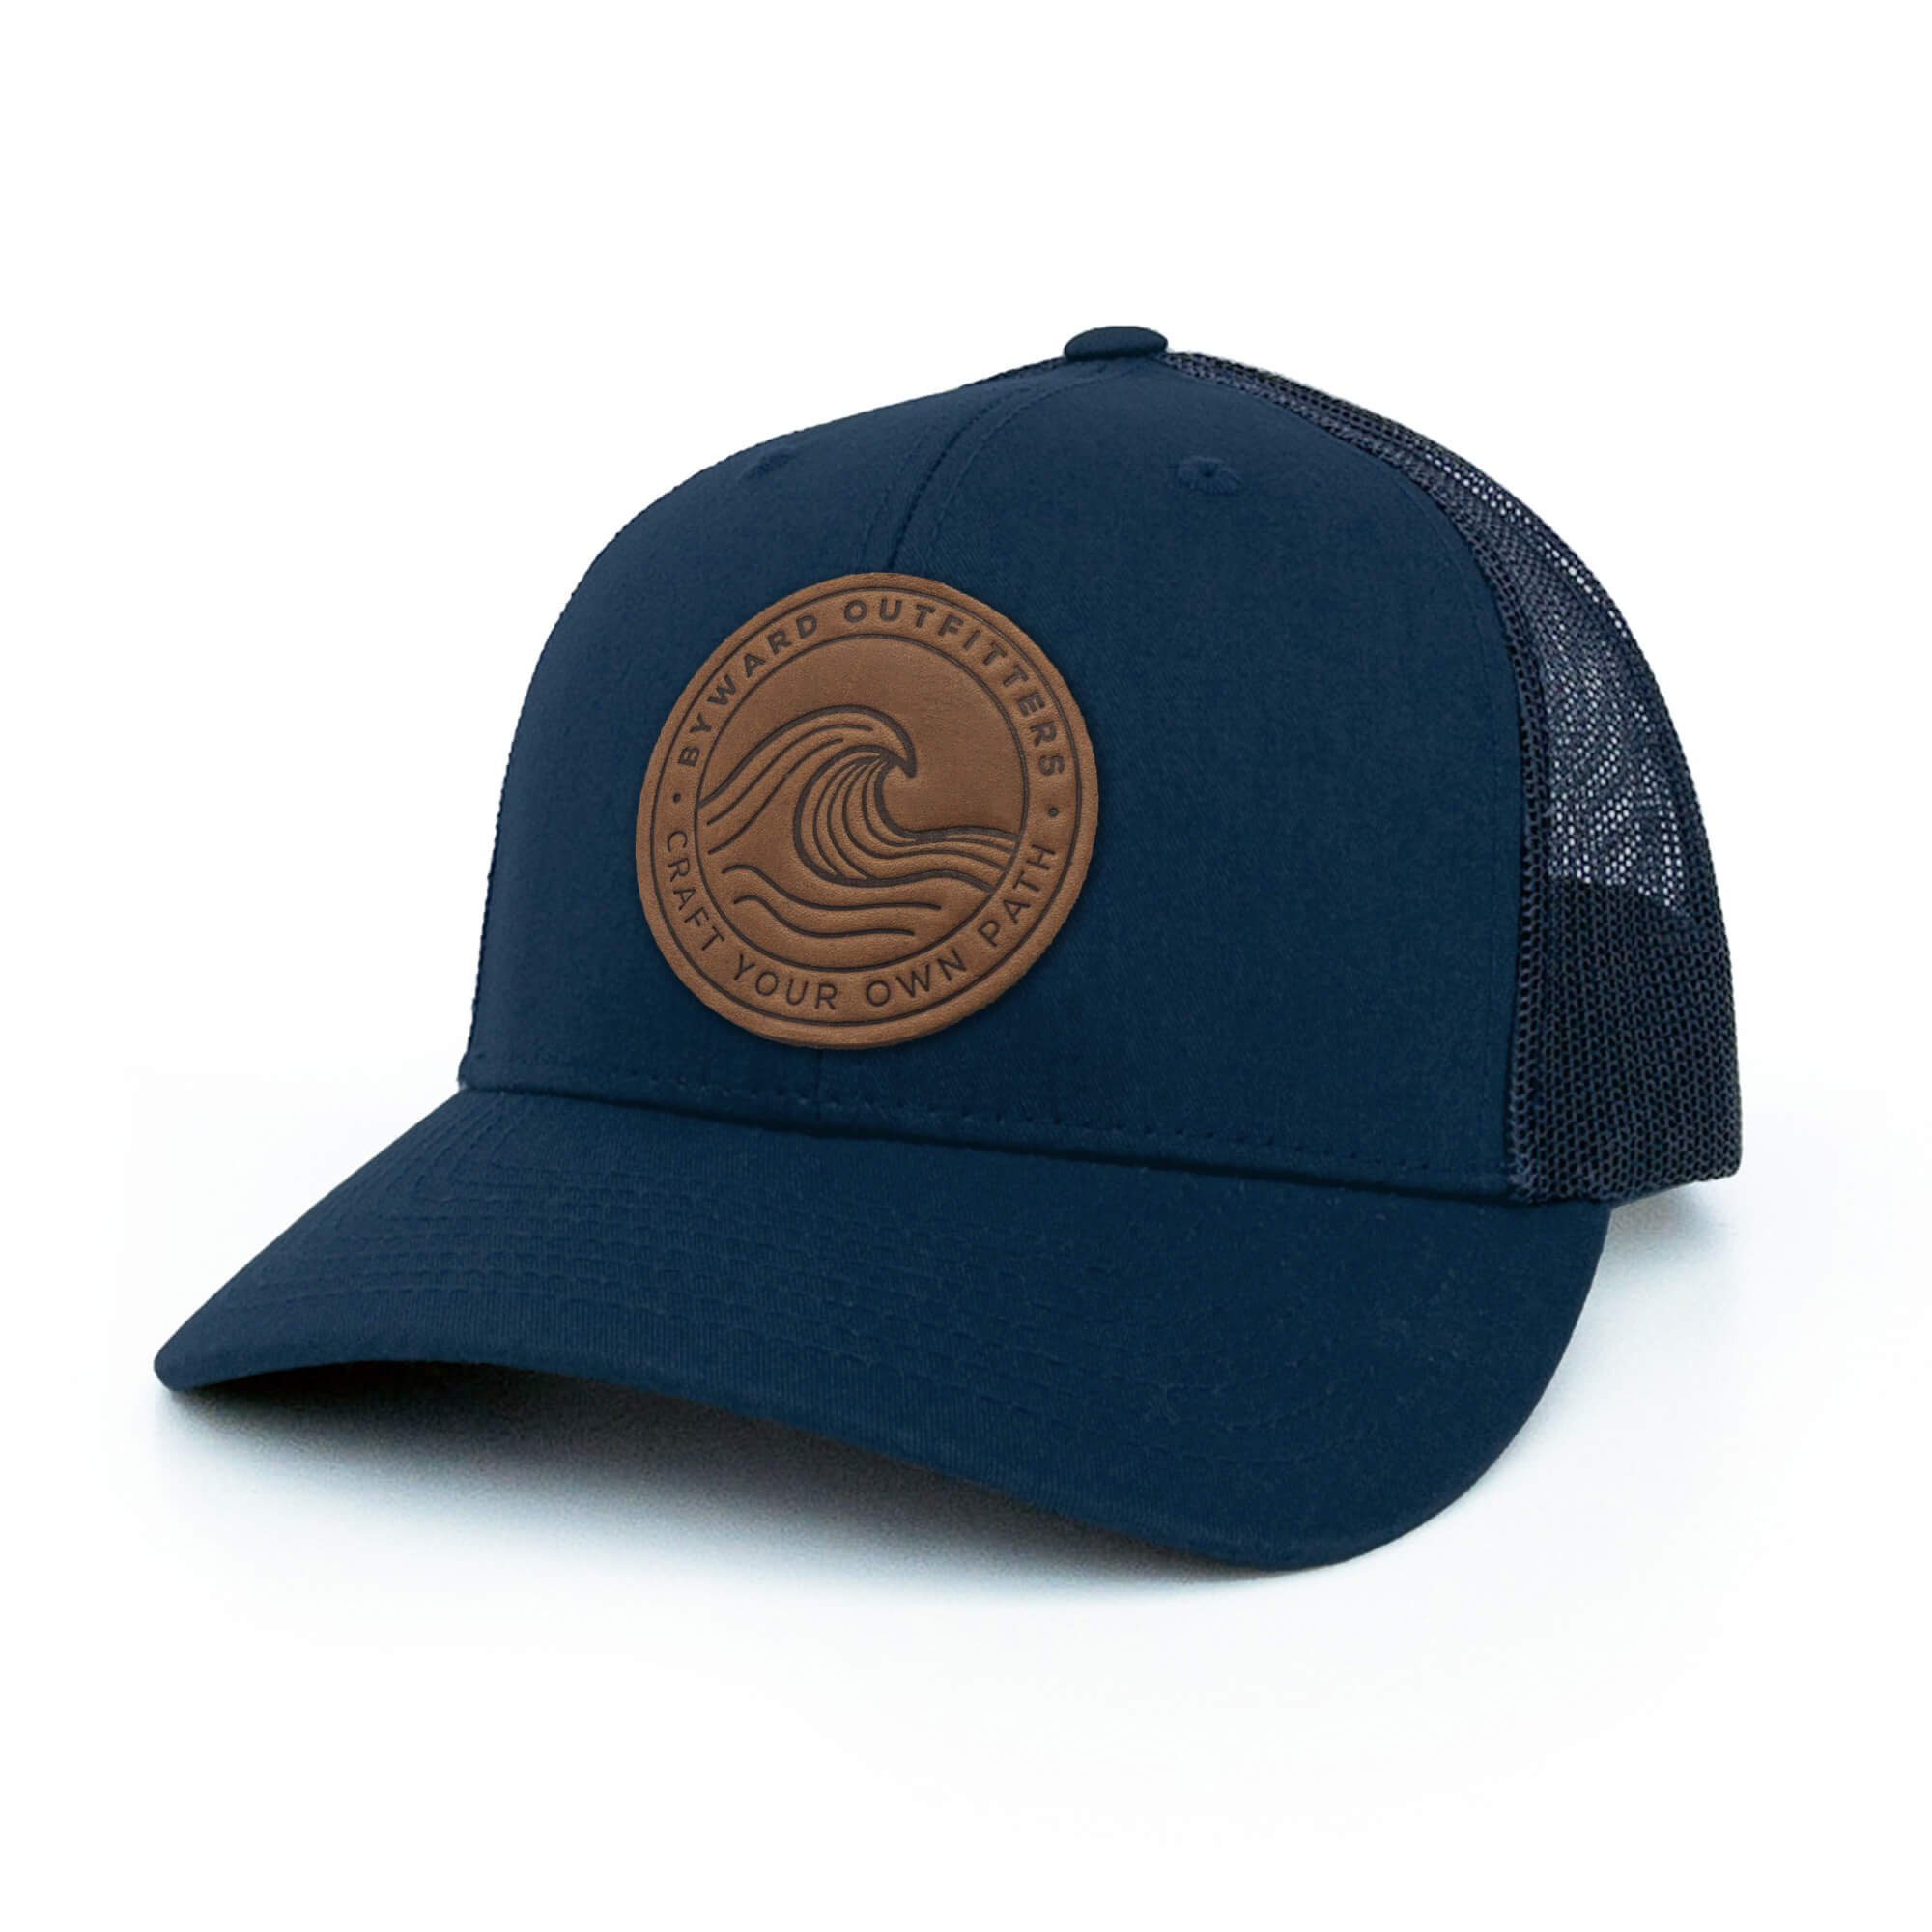 Navy trucker hat with full-grain leather patch of a Rolling Wave | BLACK-005-003, CHARC-005-003, NAVY-005-003, HGREY-005-003, MOSS-005-003, BROWN-005-003